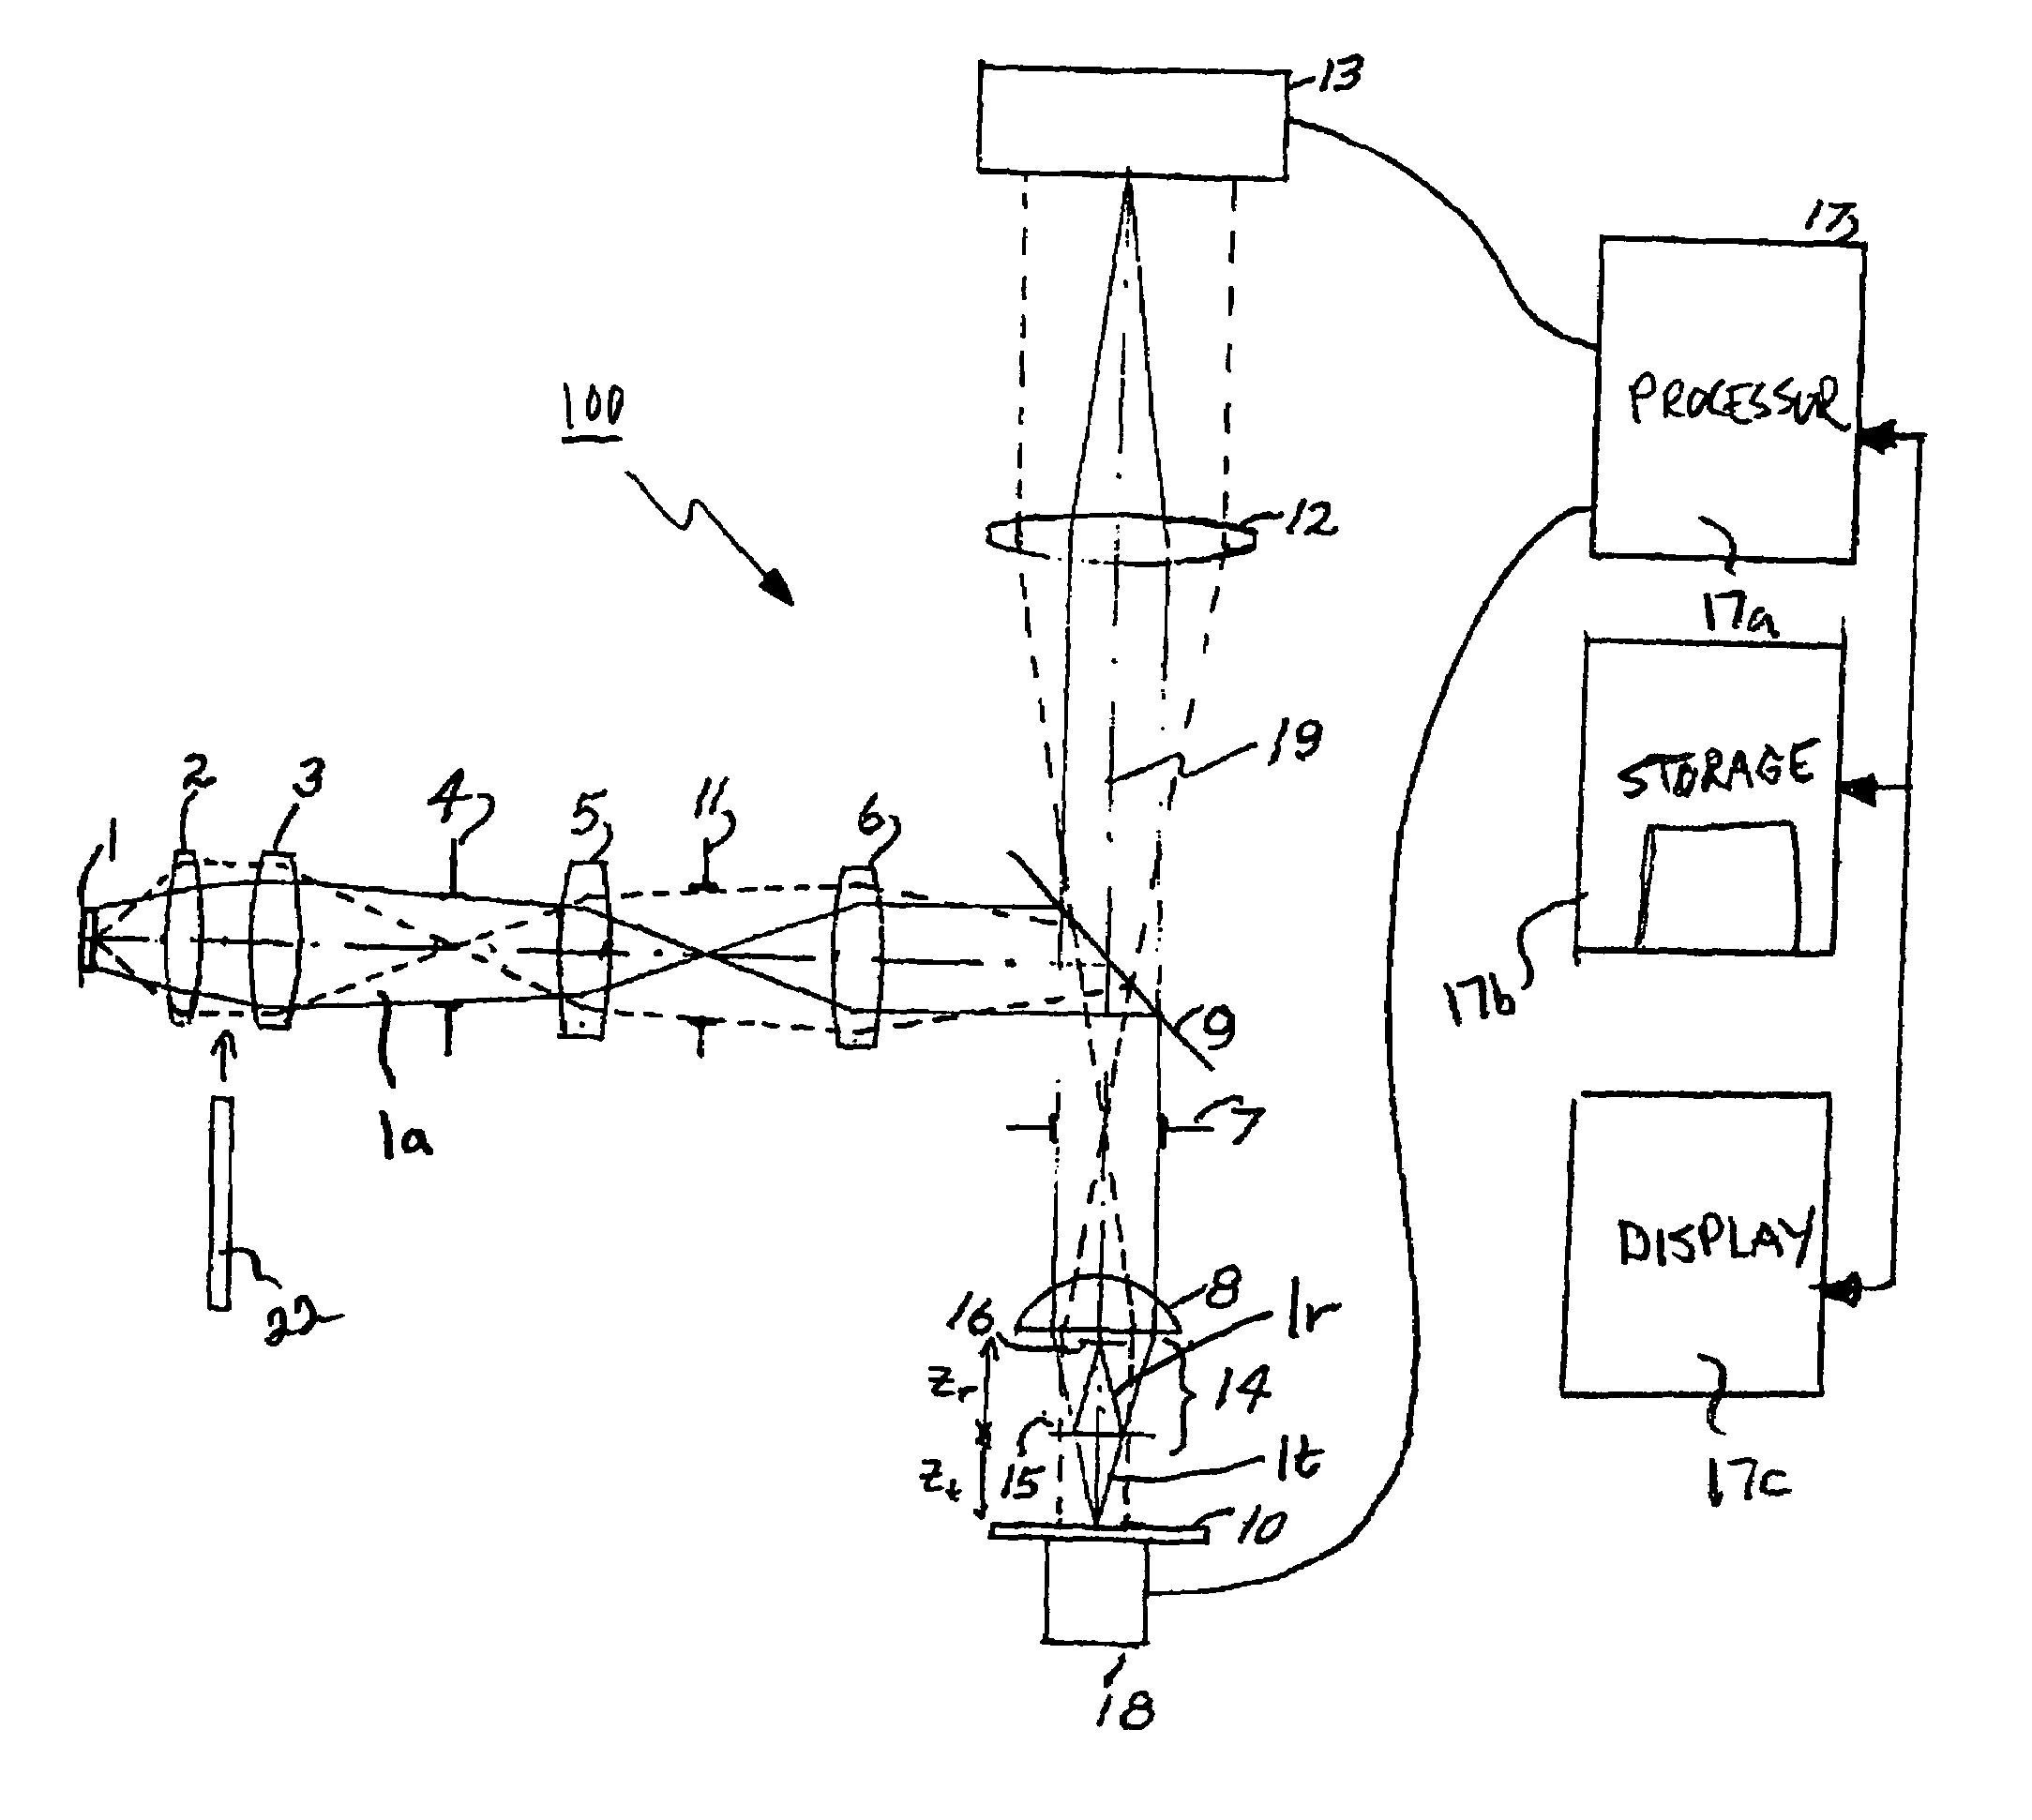 Method and apparatus for optically analyzing a surface